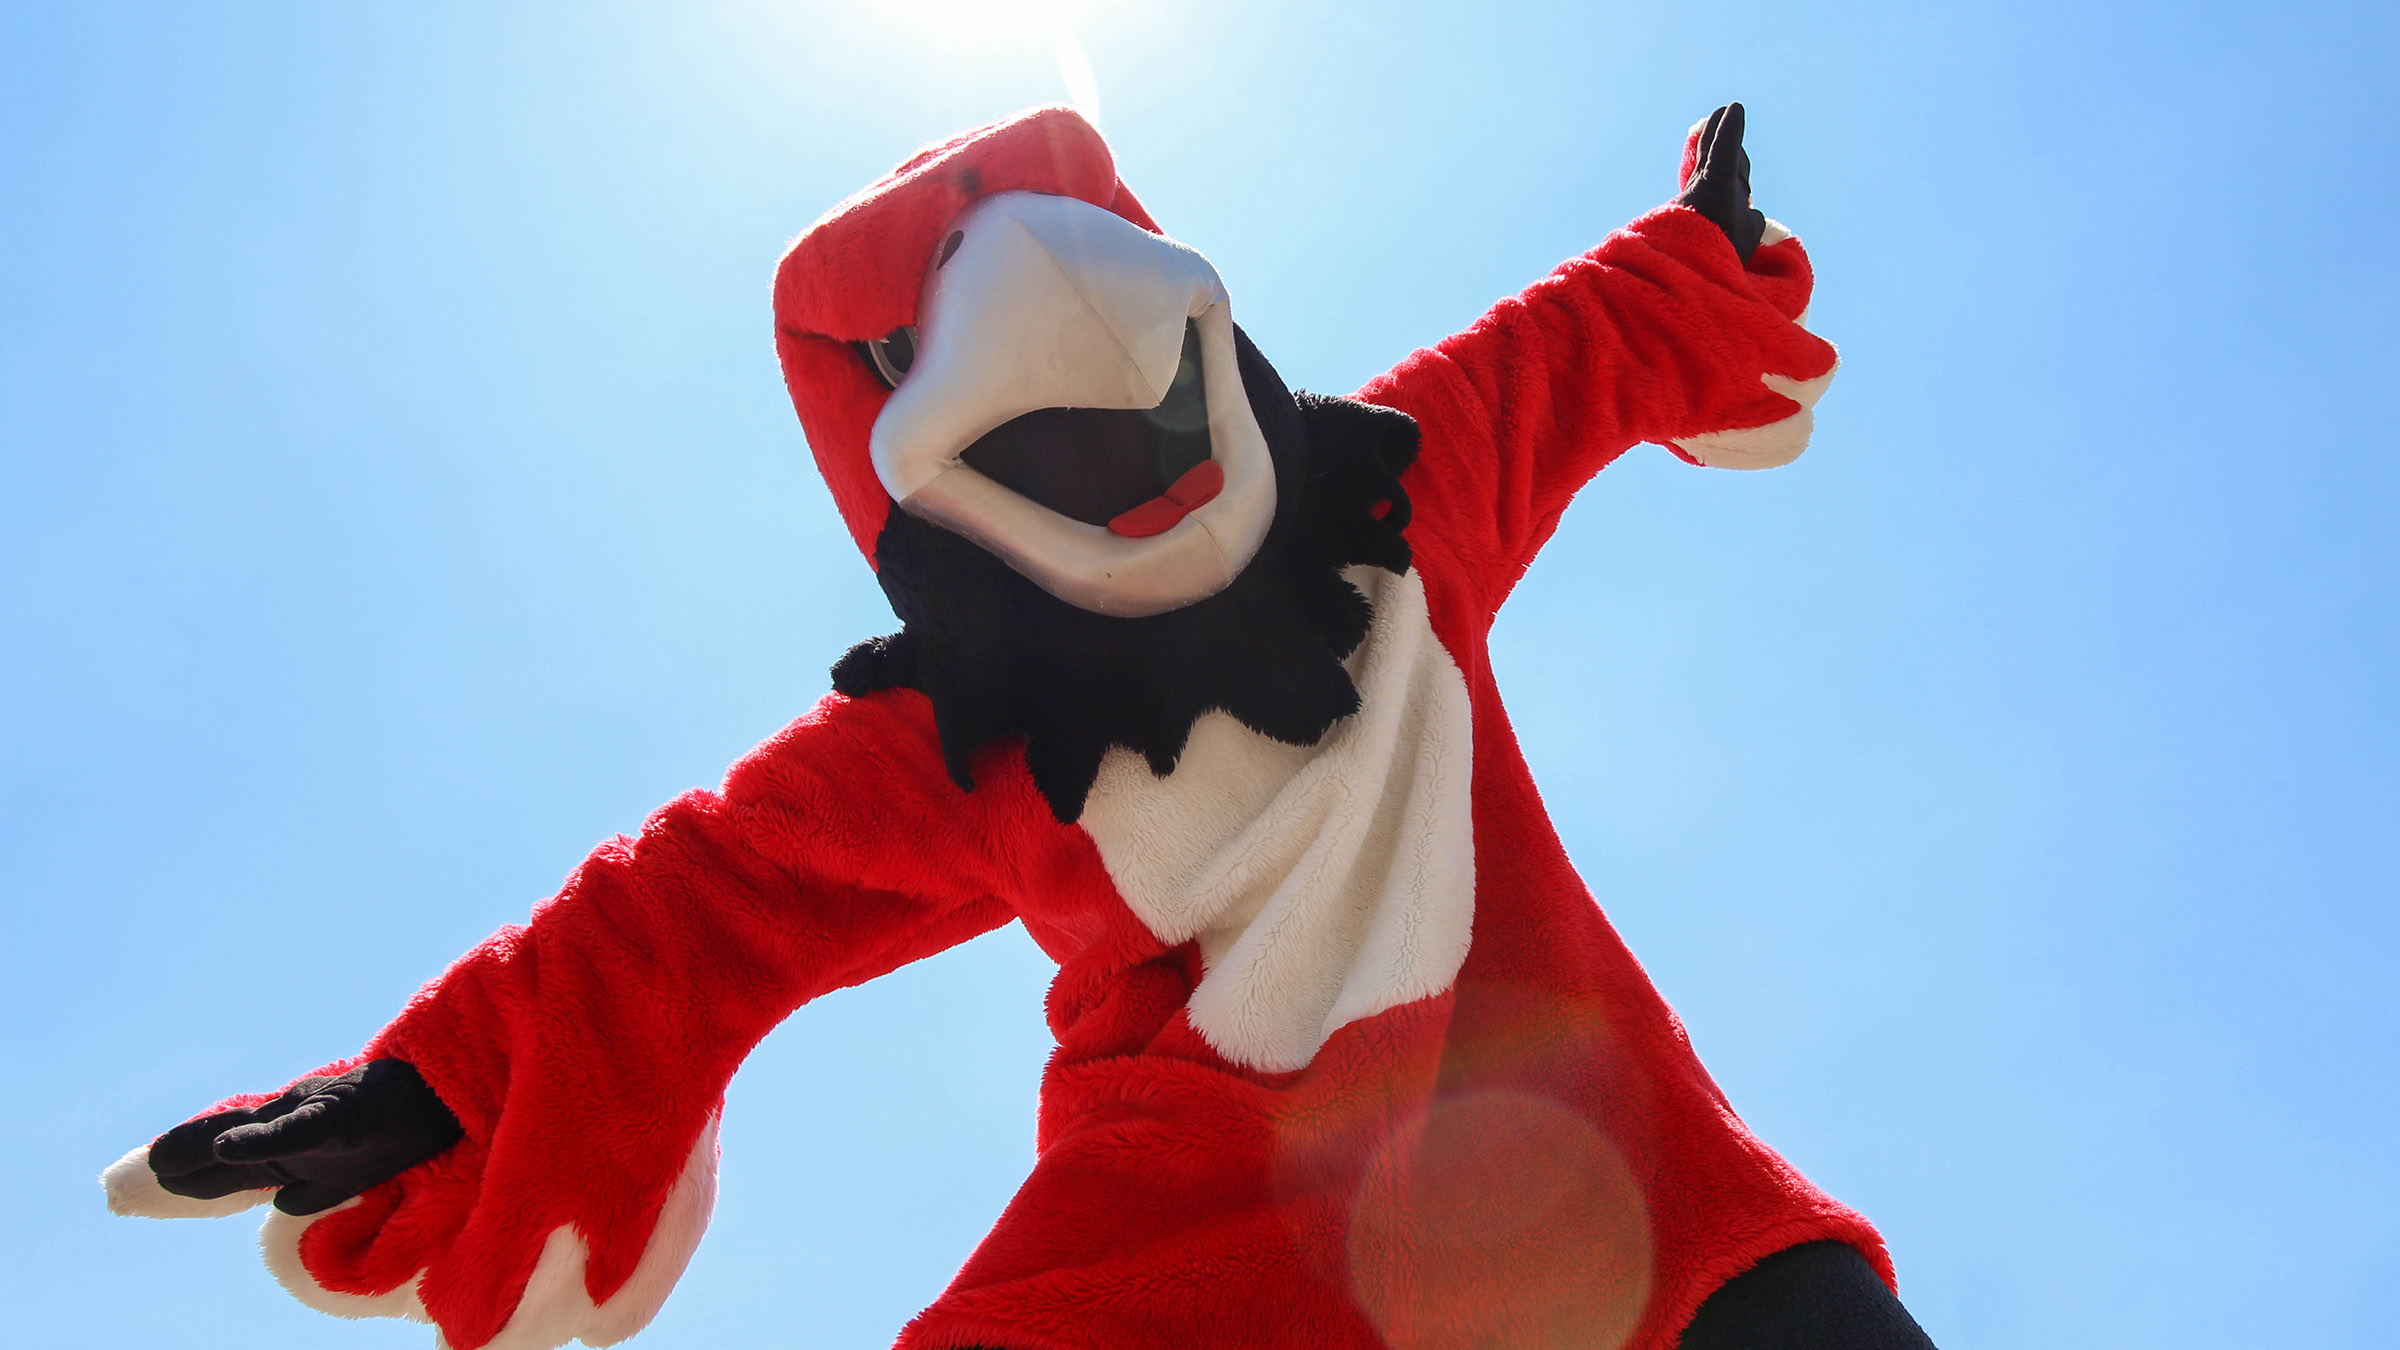 Rocky the Red Hawk mascot with his arms outstretched against a blue sky.